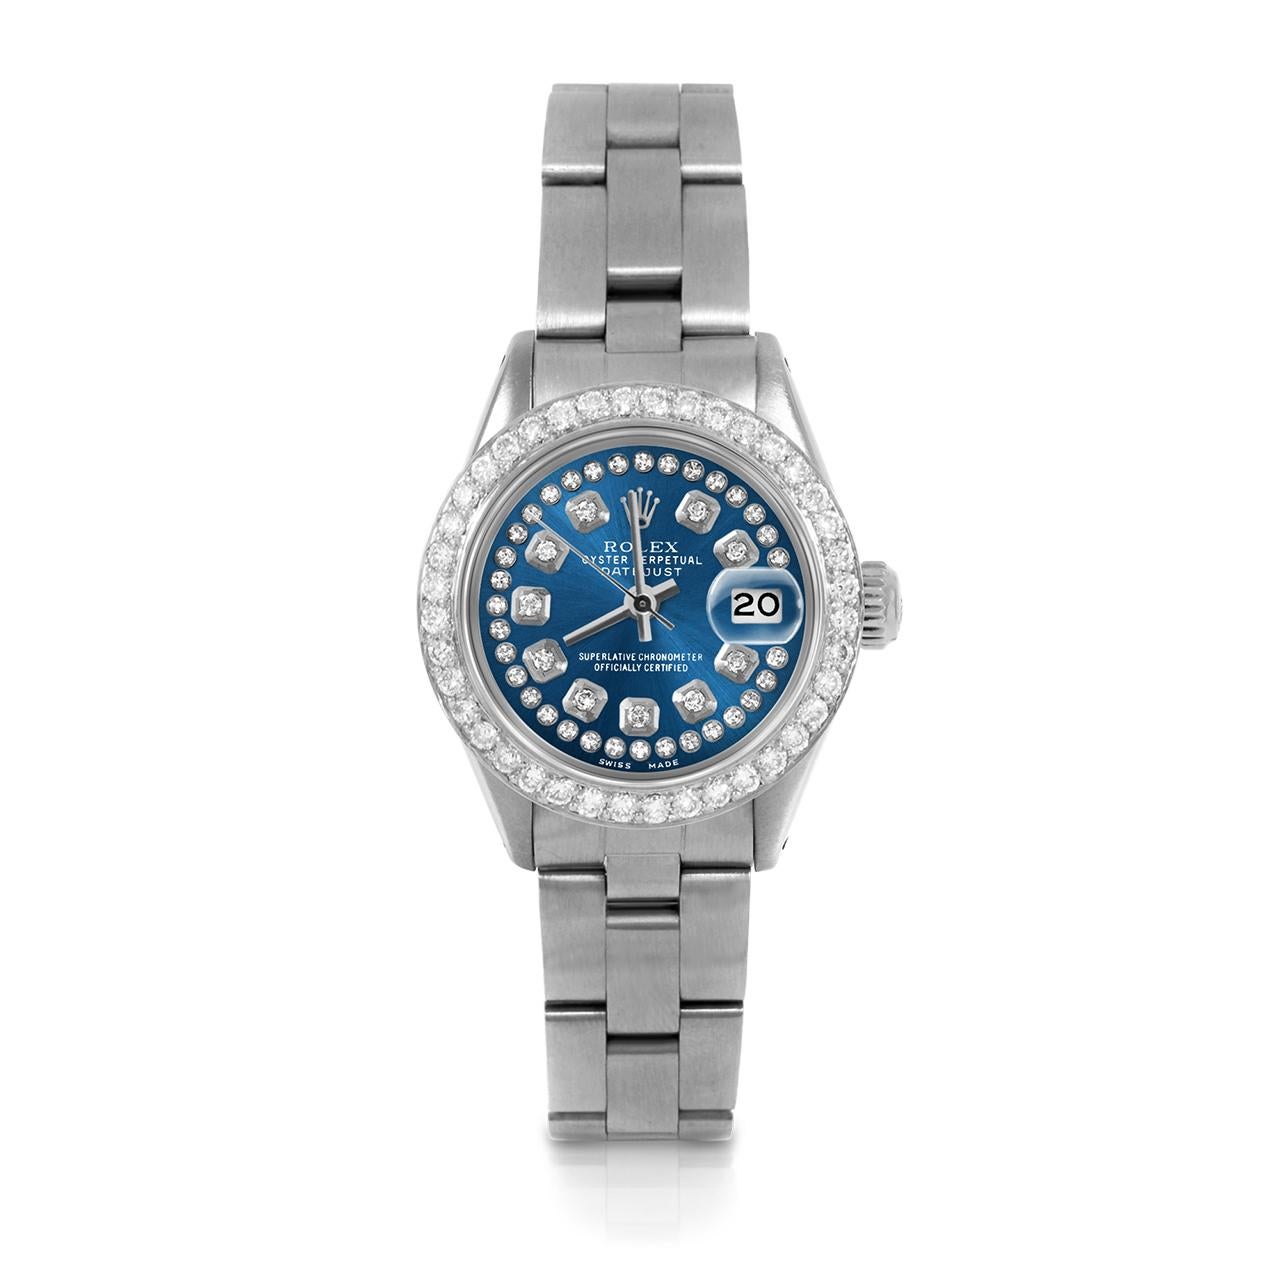 Pre-Owned Rolex 6917 Ladies 26mm Datejust Watch, Custom Blue String Diamond Dial & Custom 1ct Diamond Bezel on Rolex Stainless Steel Oyster Band.   

SKU 6917-SS-BLU-STRD-BDS-OYS


Brand/Model:        Rolex Datejust
Model Number:        6917
Style: 